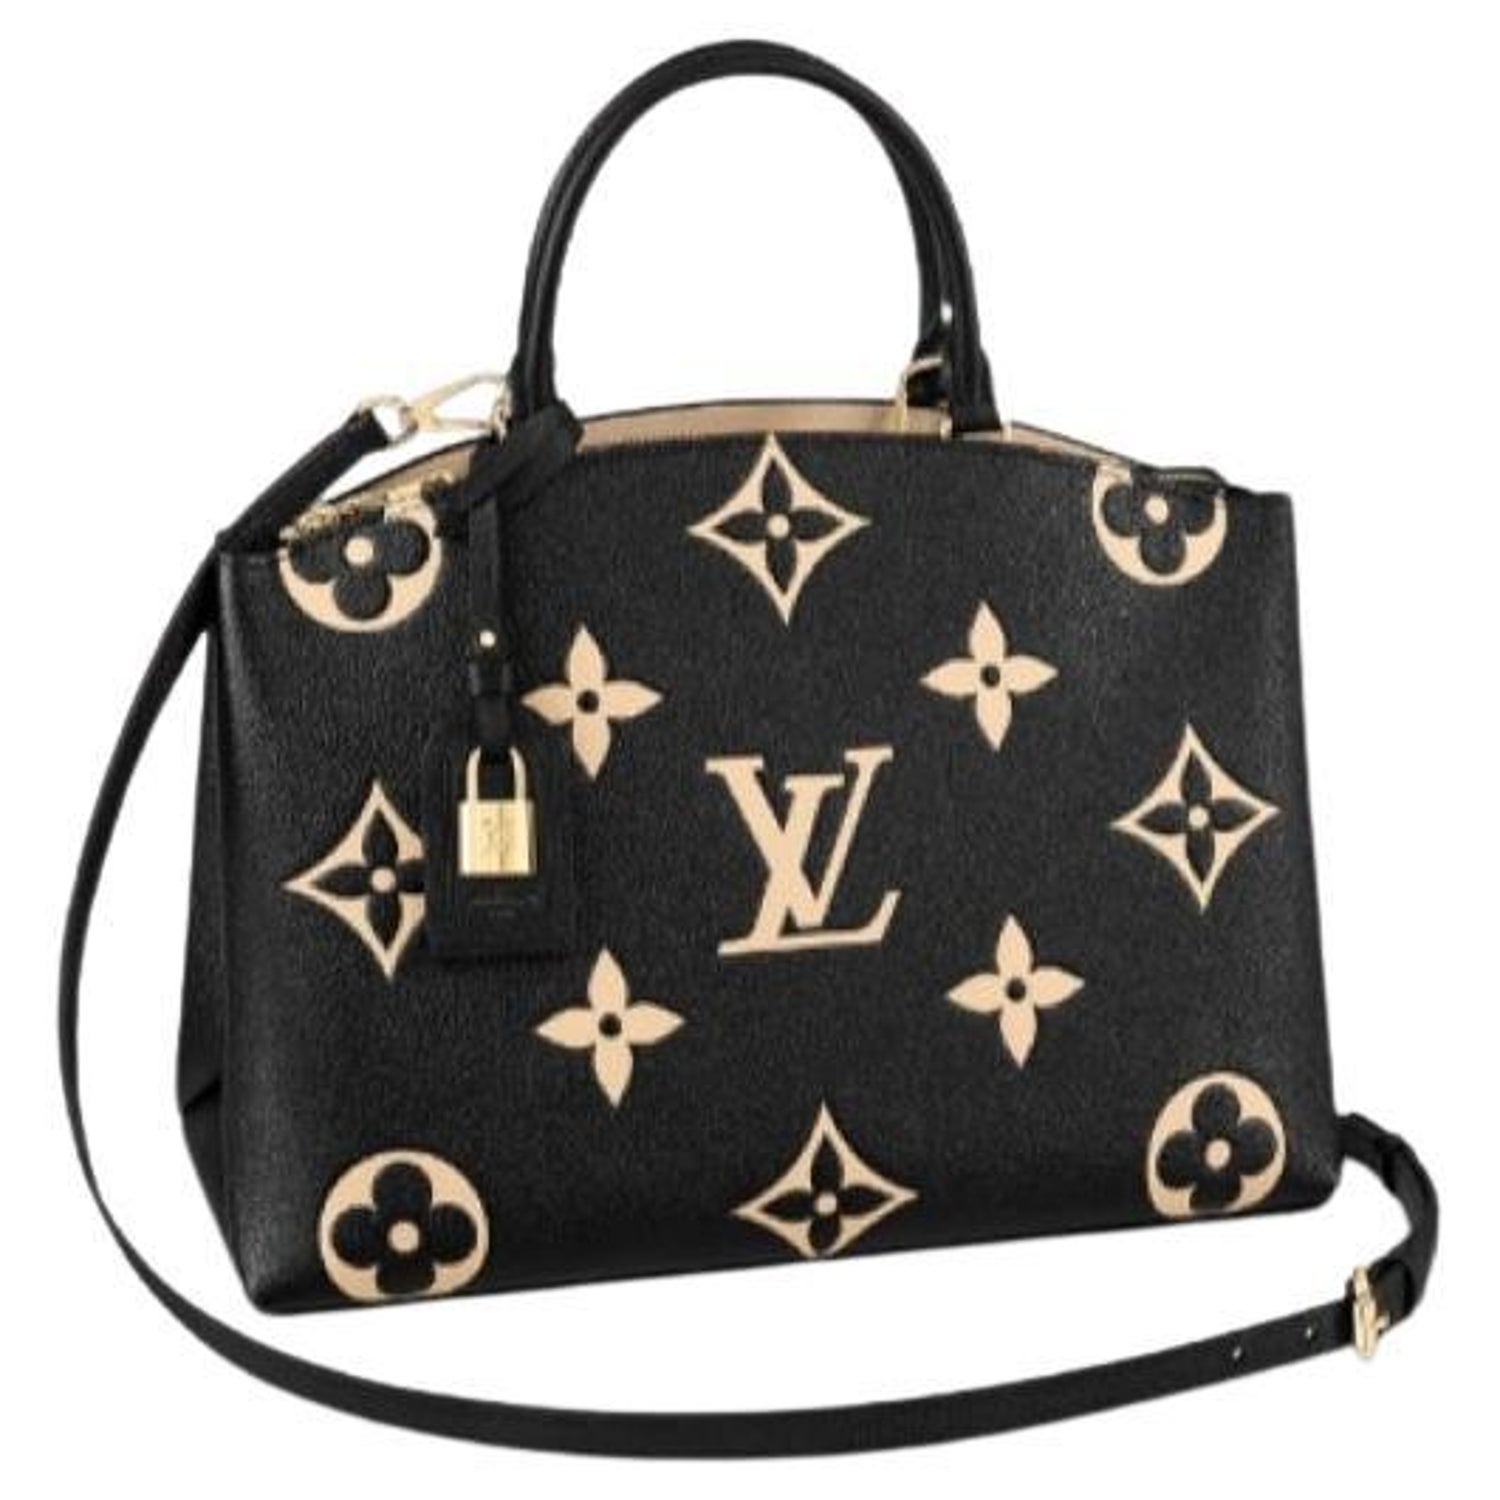 Sold at Auction: GUCCI AND LOUIS VUITTON. 1) BLUE LEATHER GUCCI TENNIS  RACQUET BAG. FIRST TIME I SAW ONE OF THESE WAS